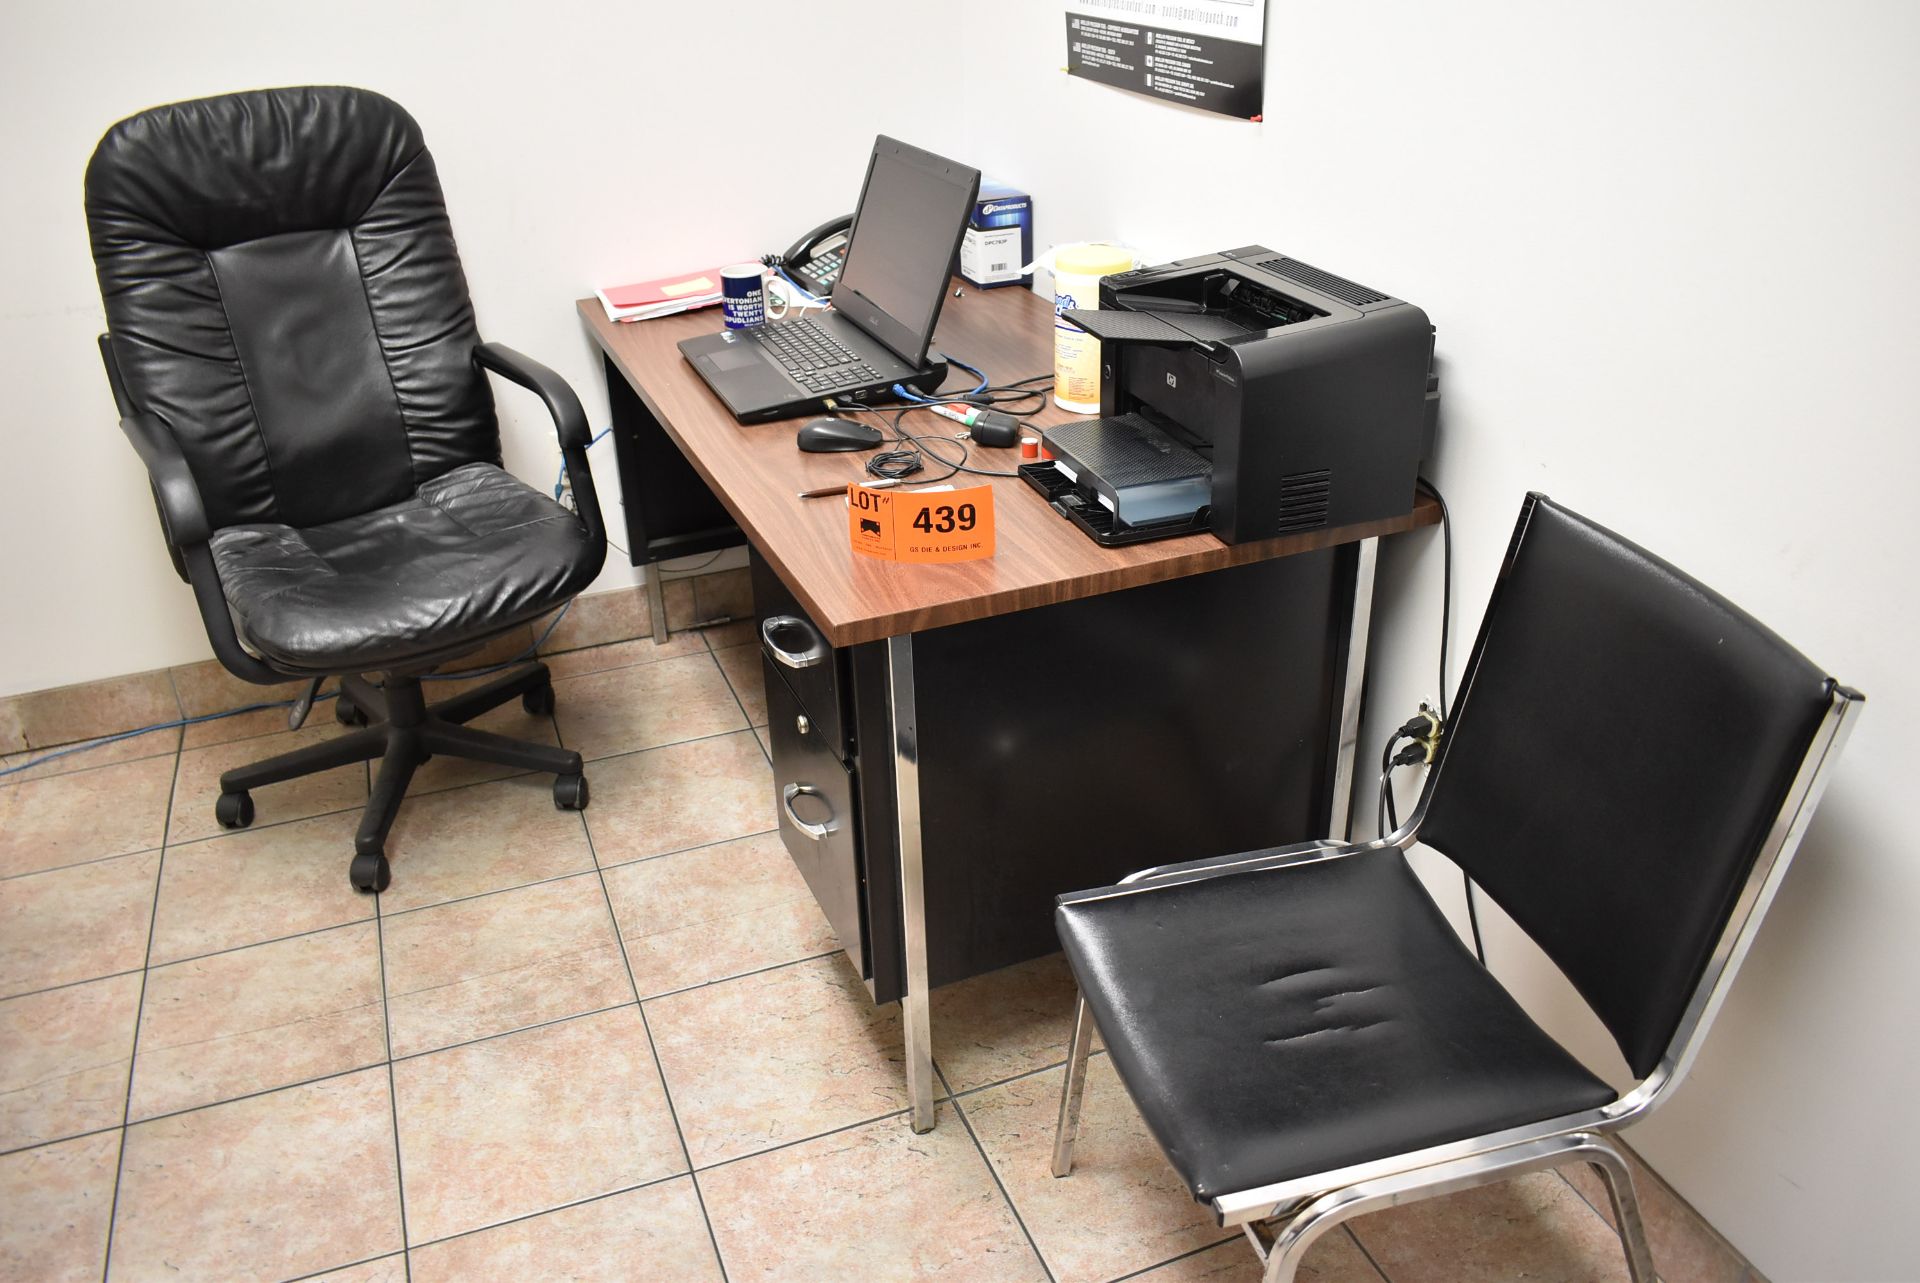 LOT/ OFFICE FURNITURE CONSISTING OF (2) DESKS & (3) CHAIRS (FURNITURE ONLY - NO CONTENTS OR